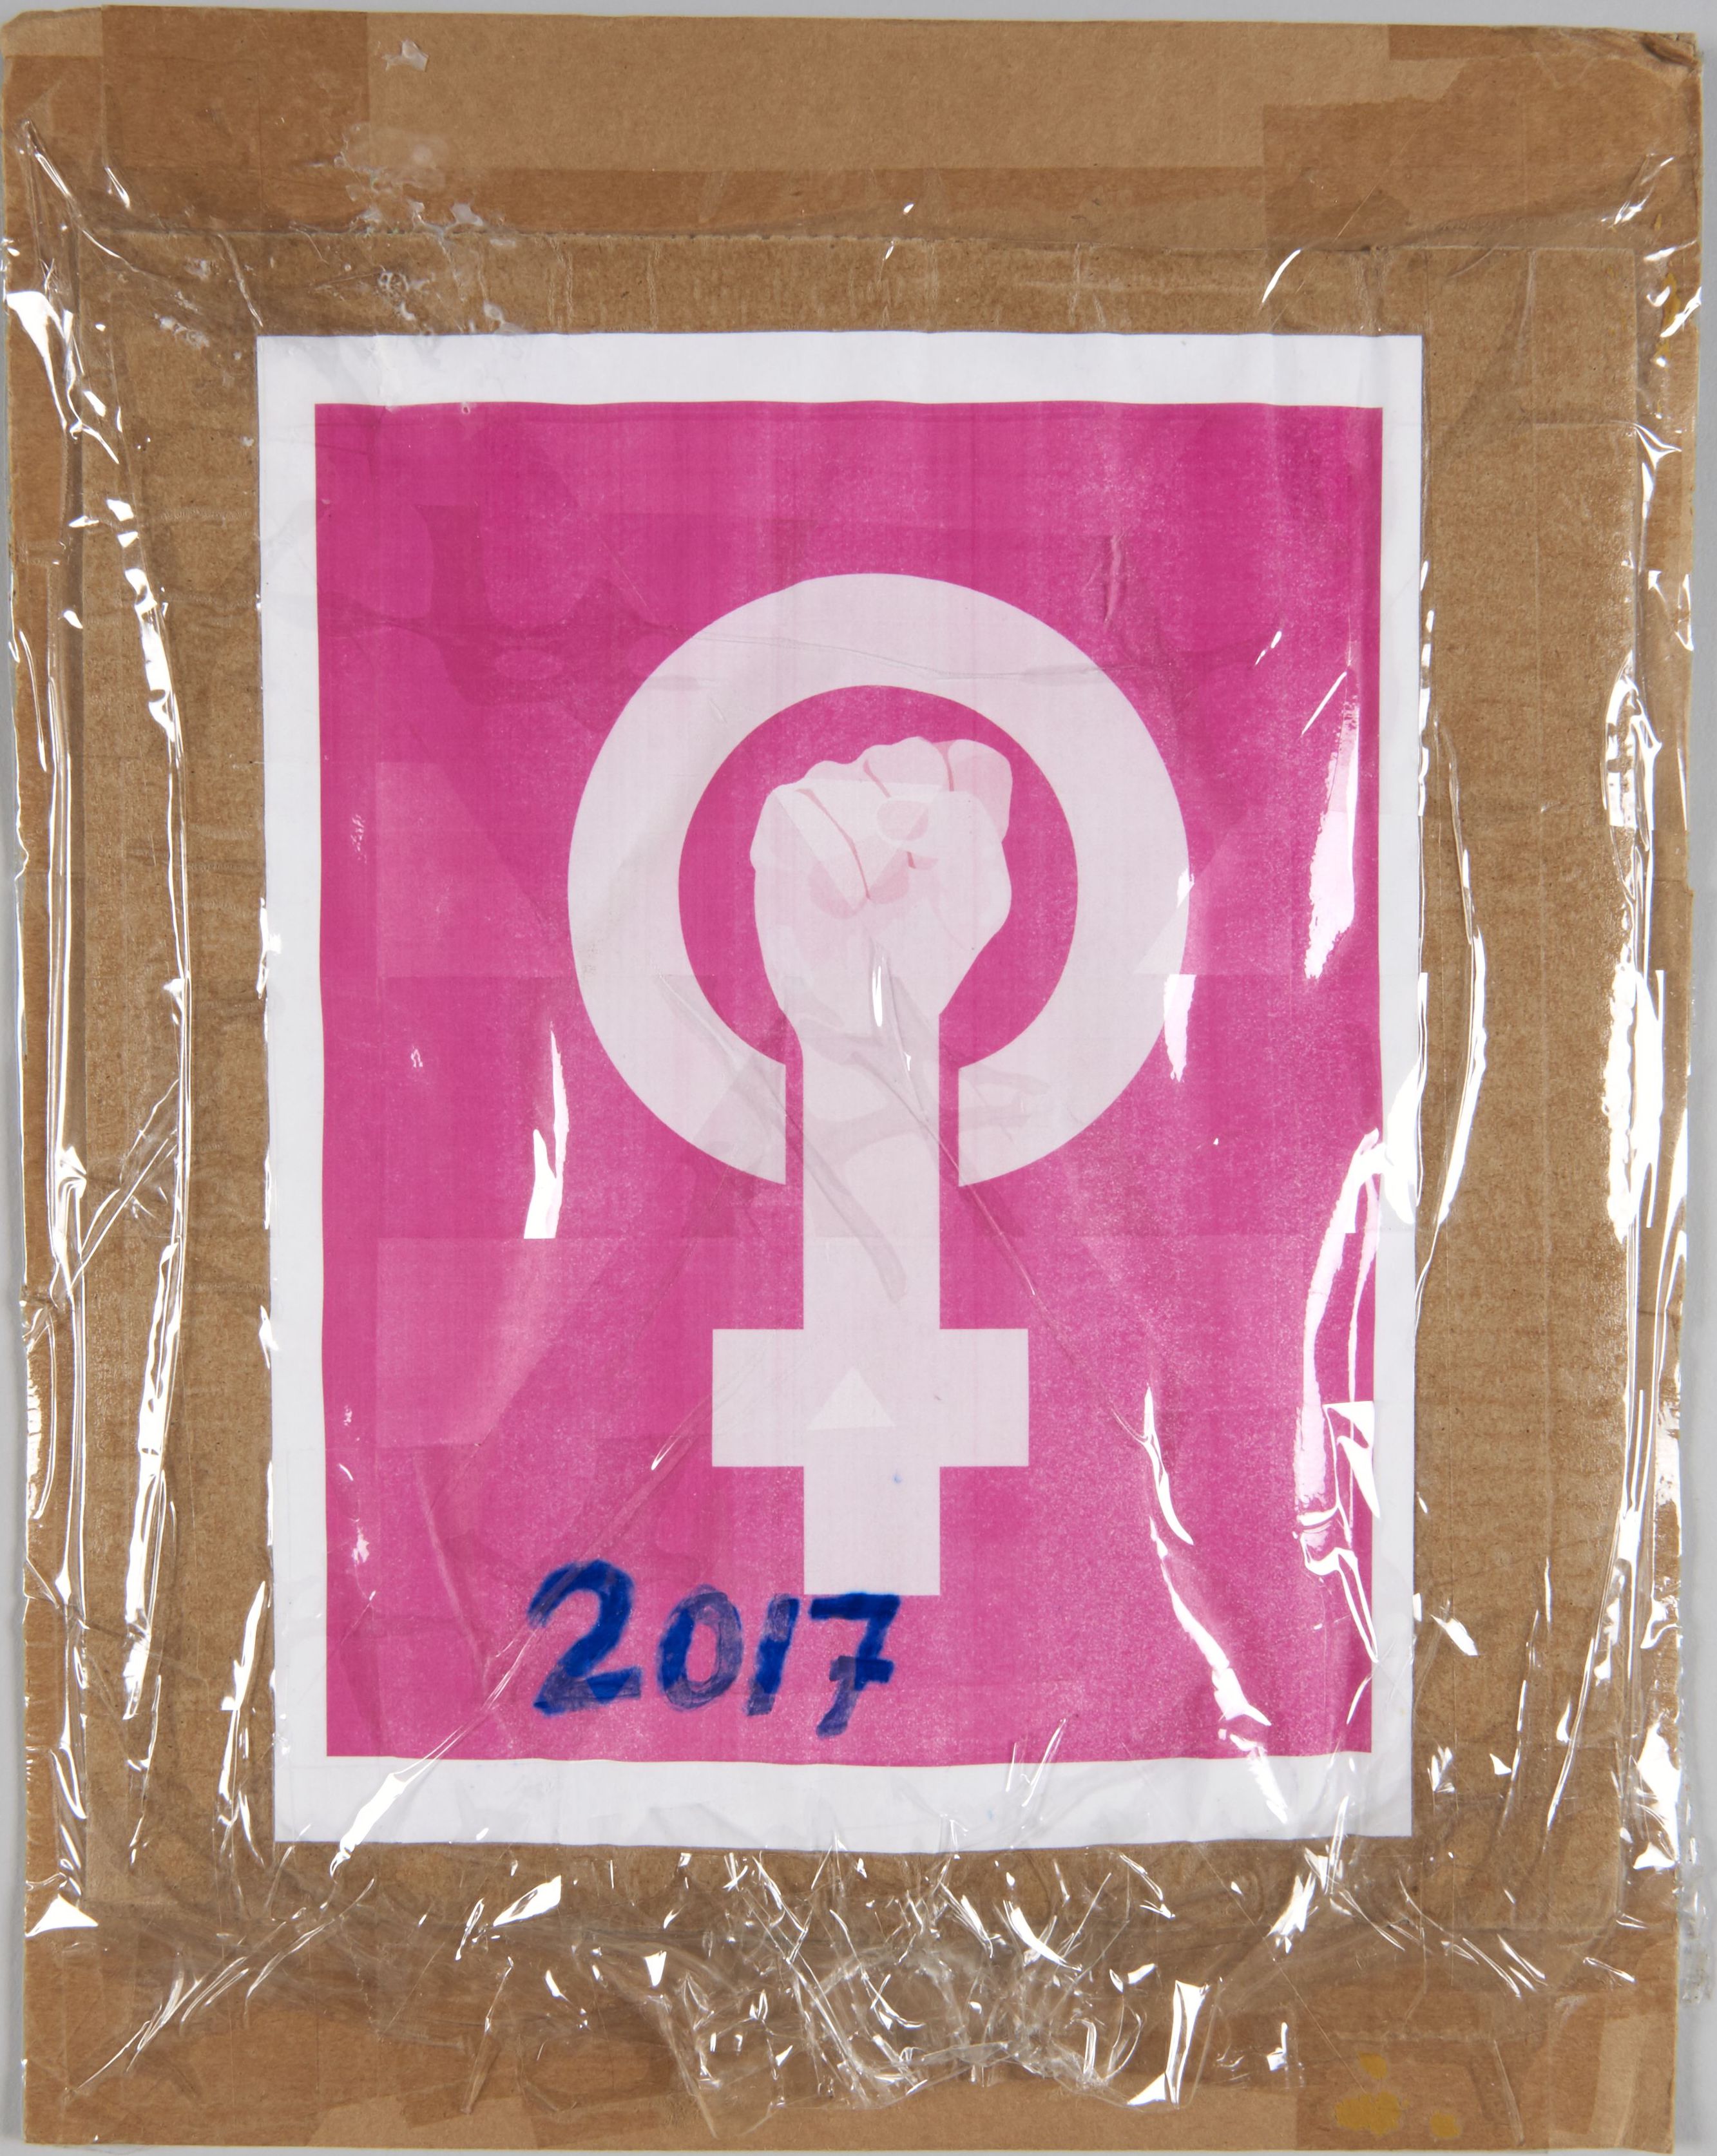 Devant d’une affiche rose avec un poing blanc et 2017. //Front of pink poster with white fist and 2017